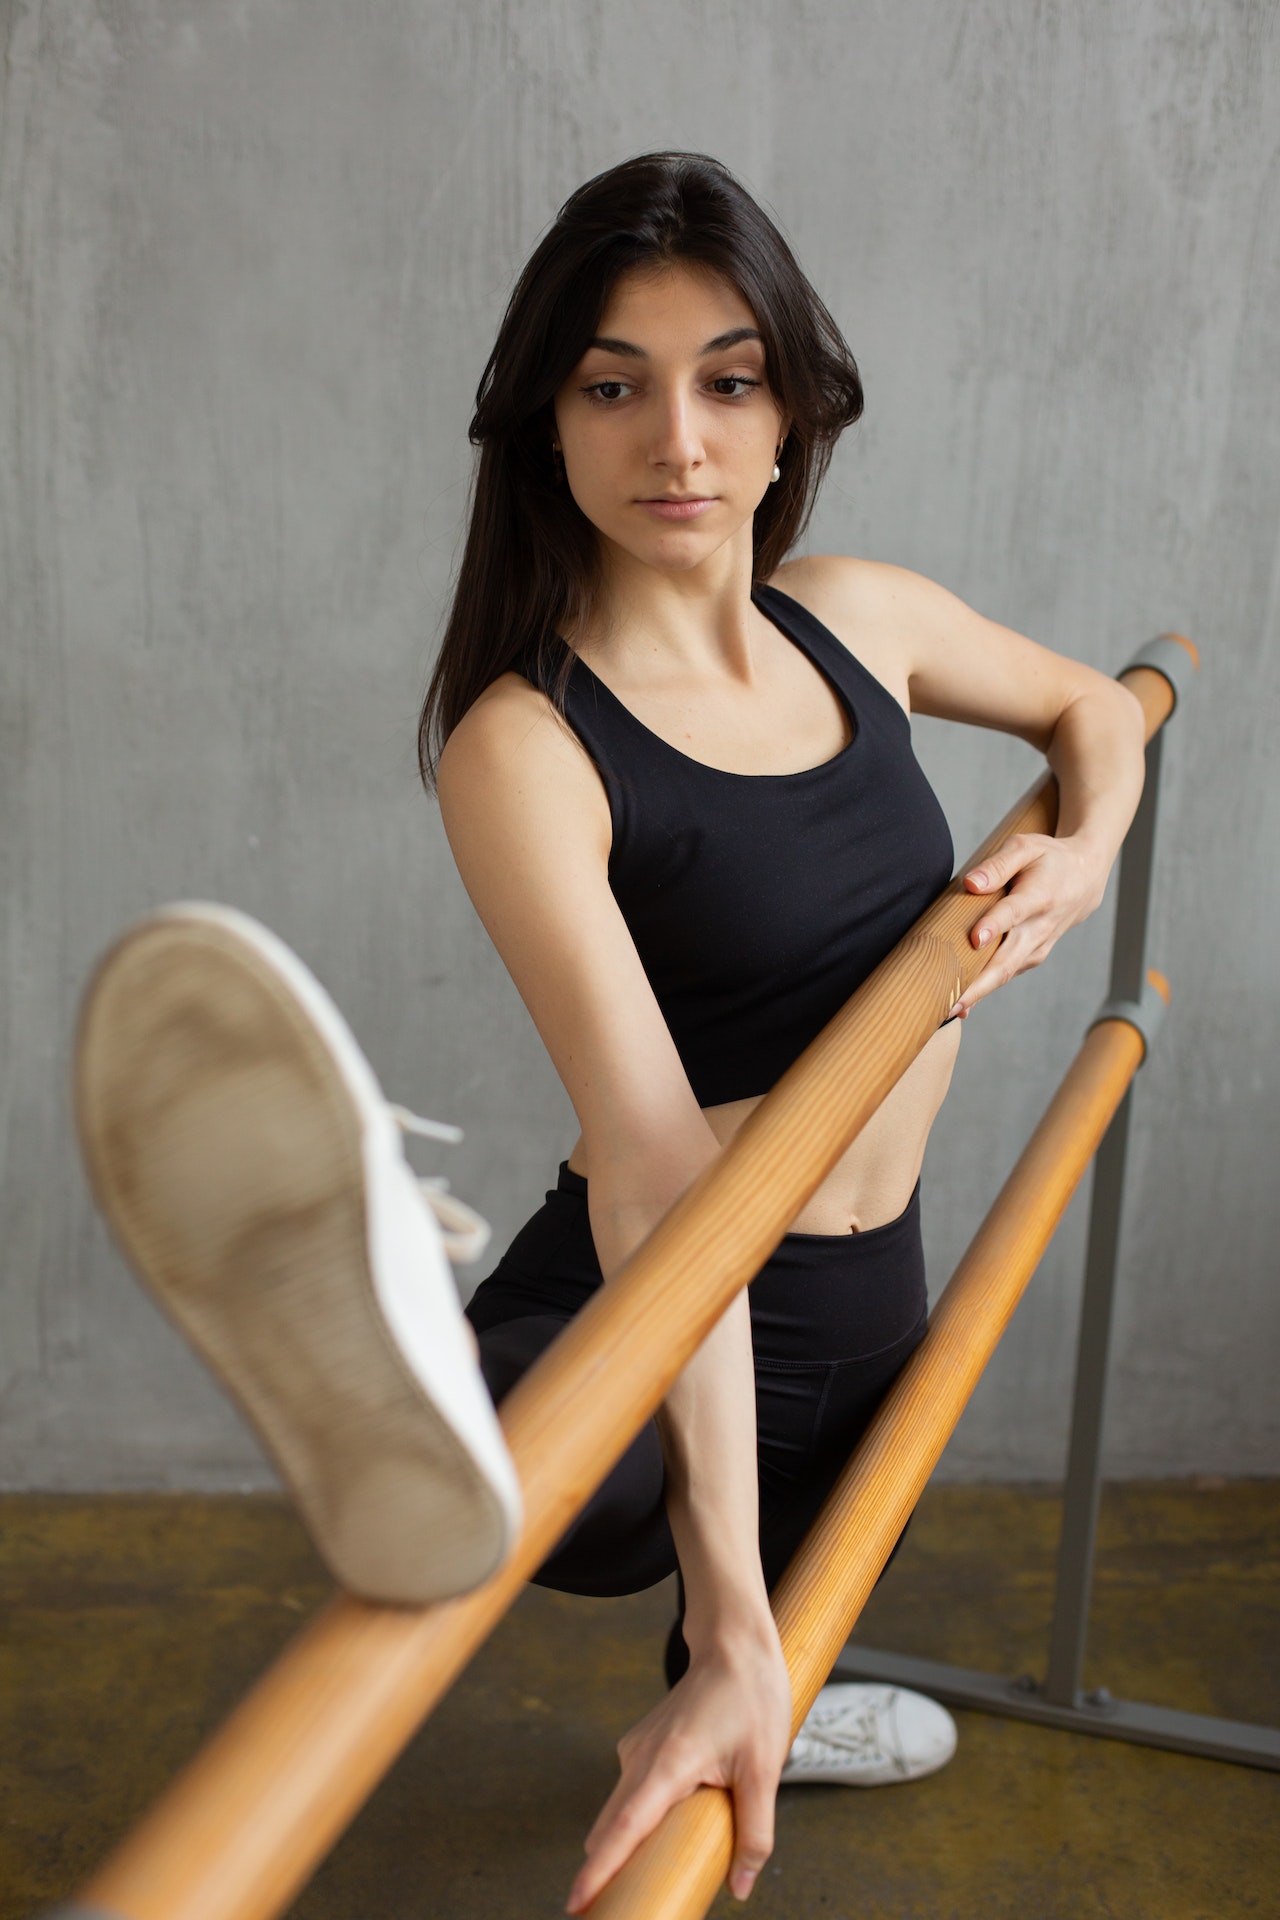 What Is Barre? Experts Explain the Benefits of Barre Workouts